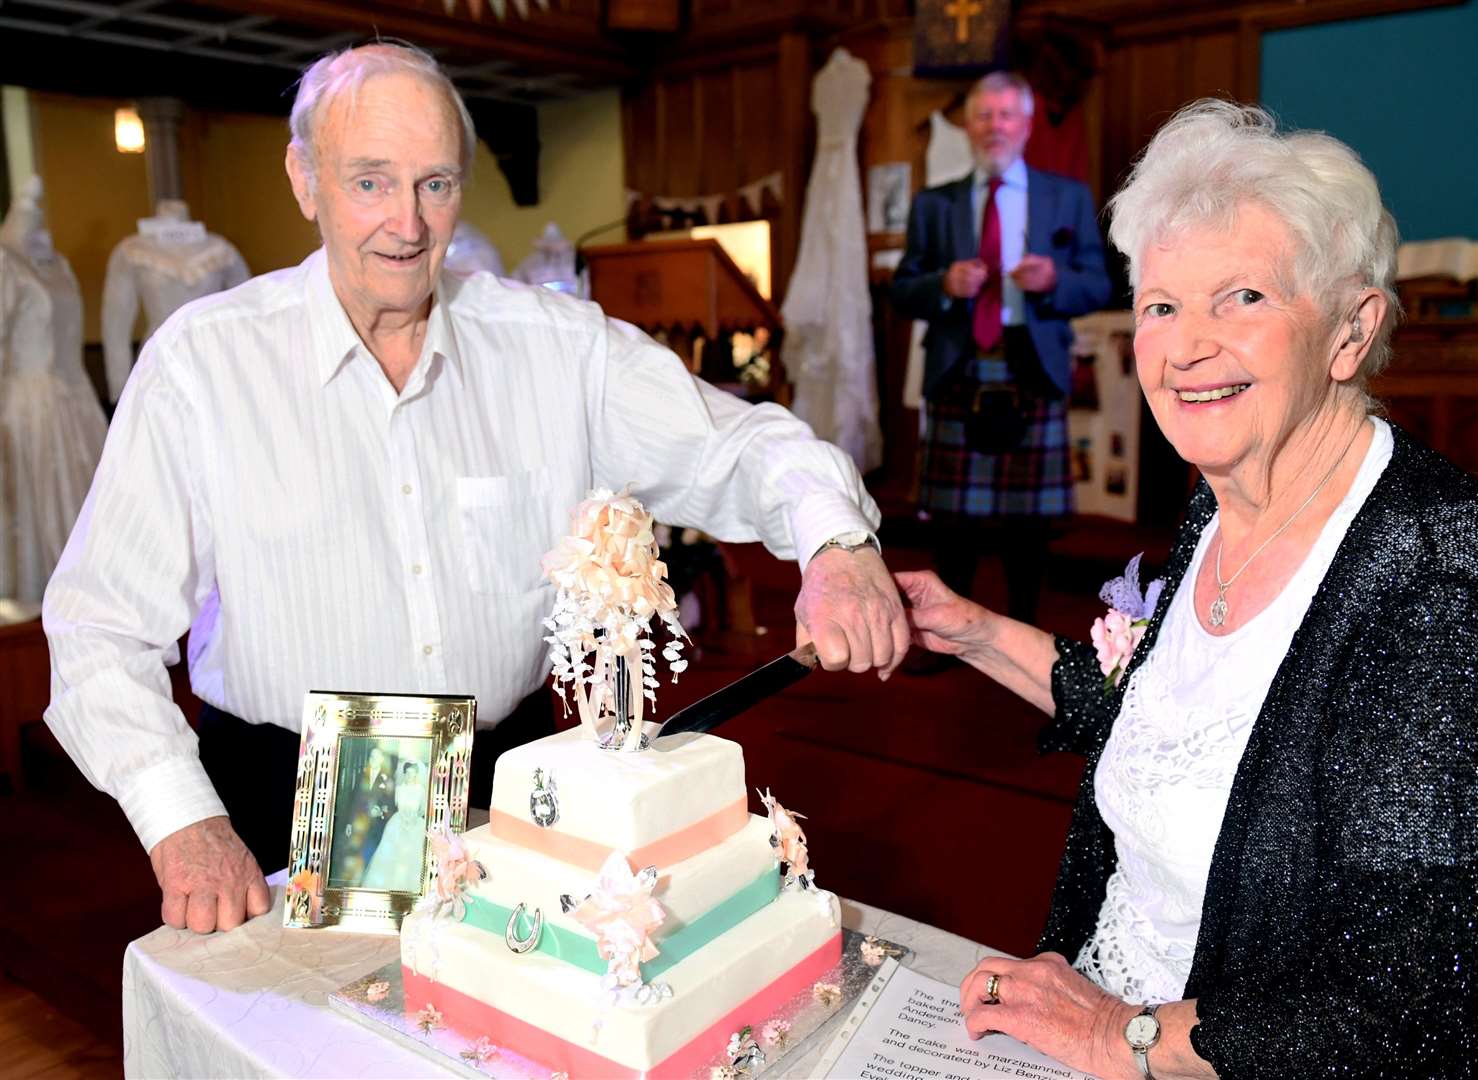 David and Lucy Livingston were married in 1961 at the Mackintosh Memorial Church in Fort William.